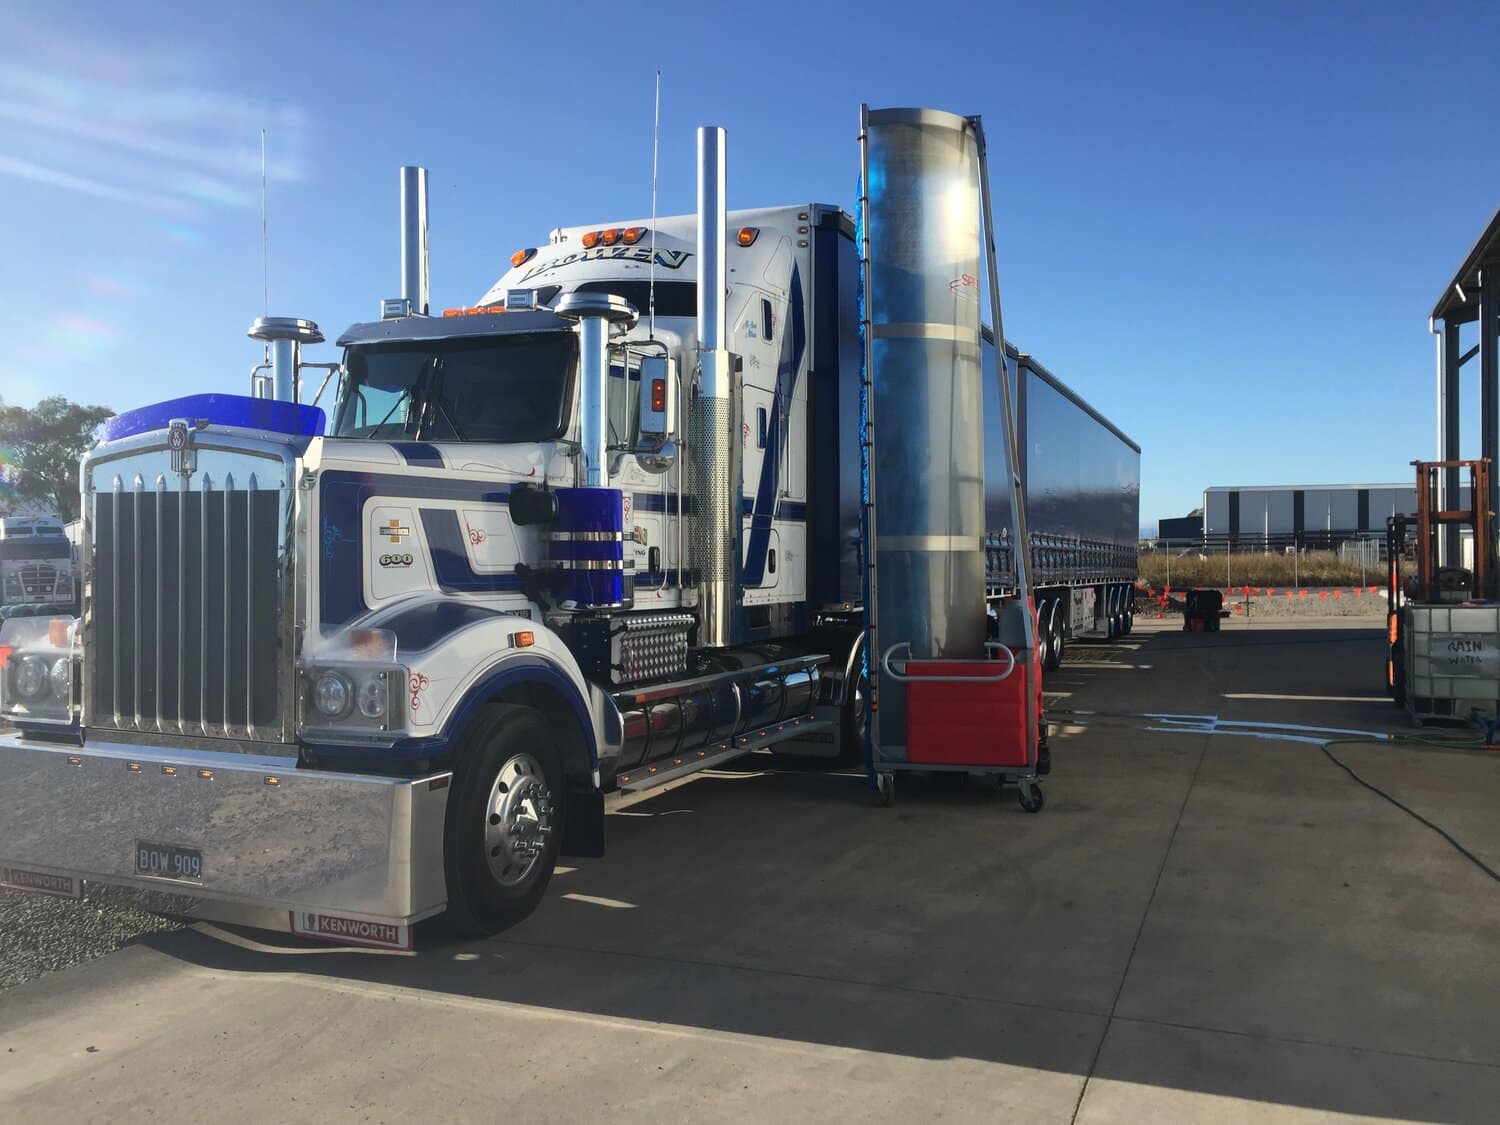 A white semi-truck with blue stripes is parked at a fuel station under a clear sky.